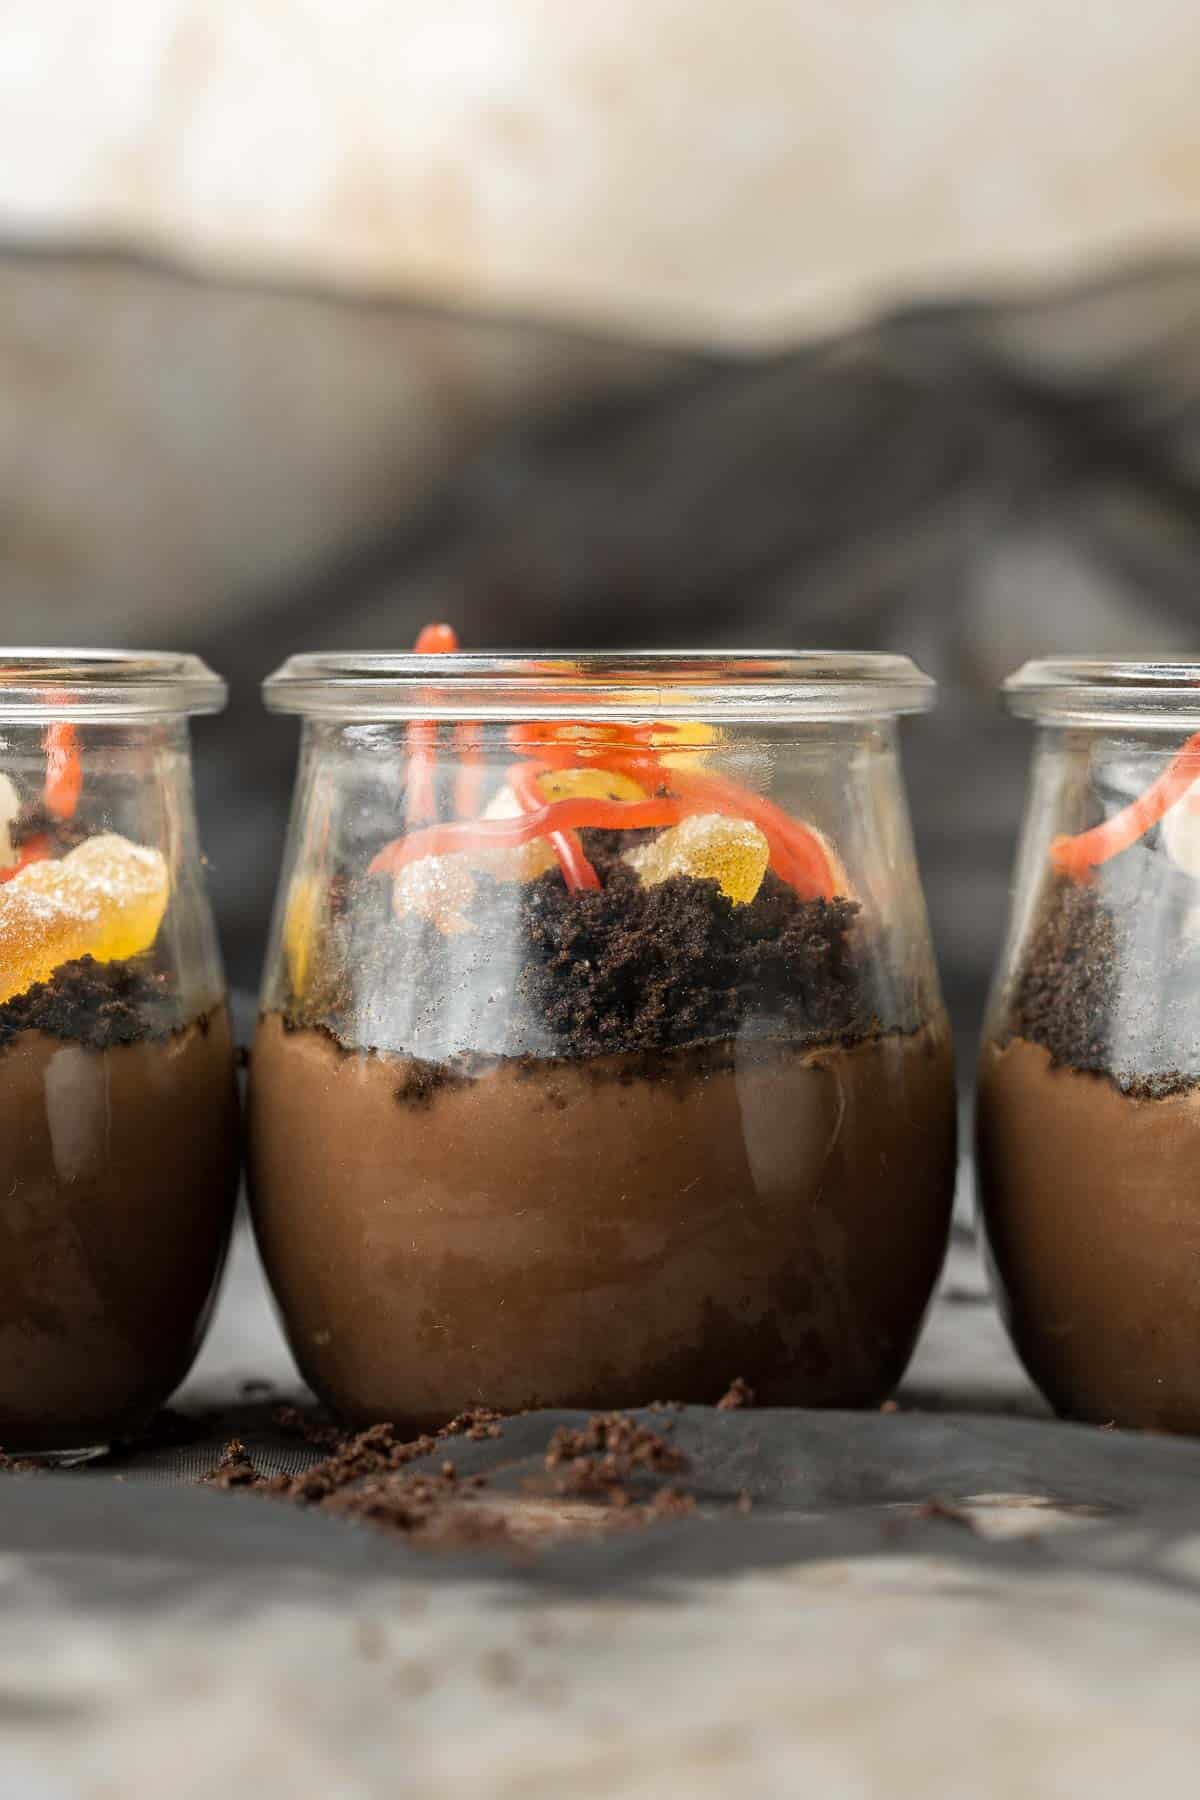 Dirt Pudding Cups are an easy Halloween dessert that is sweet, delicious, and creepy — totally on brand for spooky fun. Make worms in dirt in 10 minutes. | aheadofthyme.com